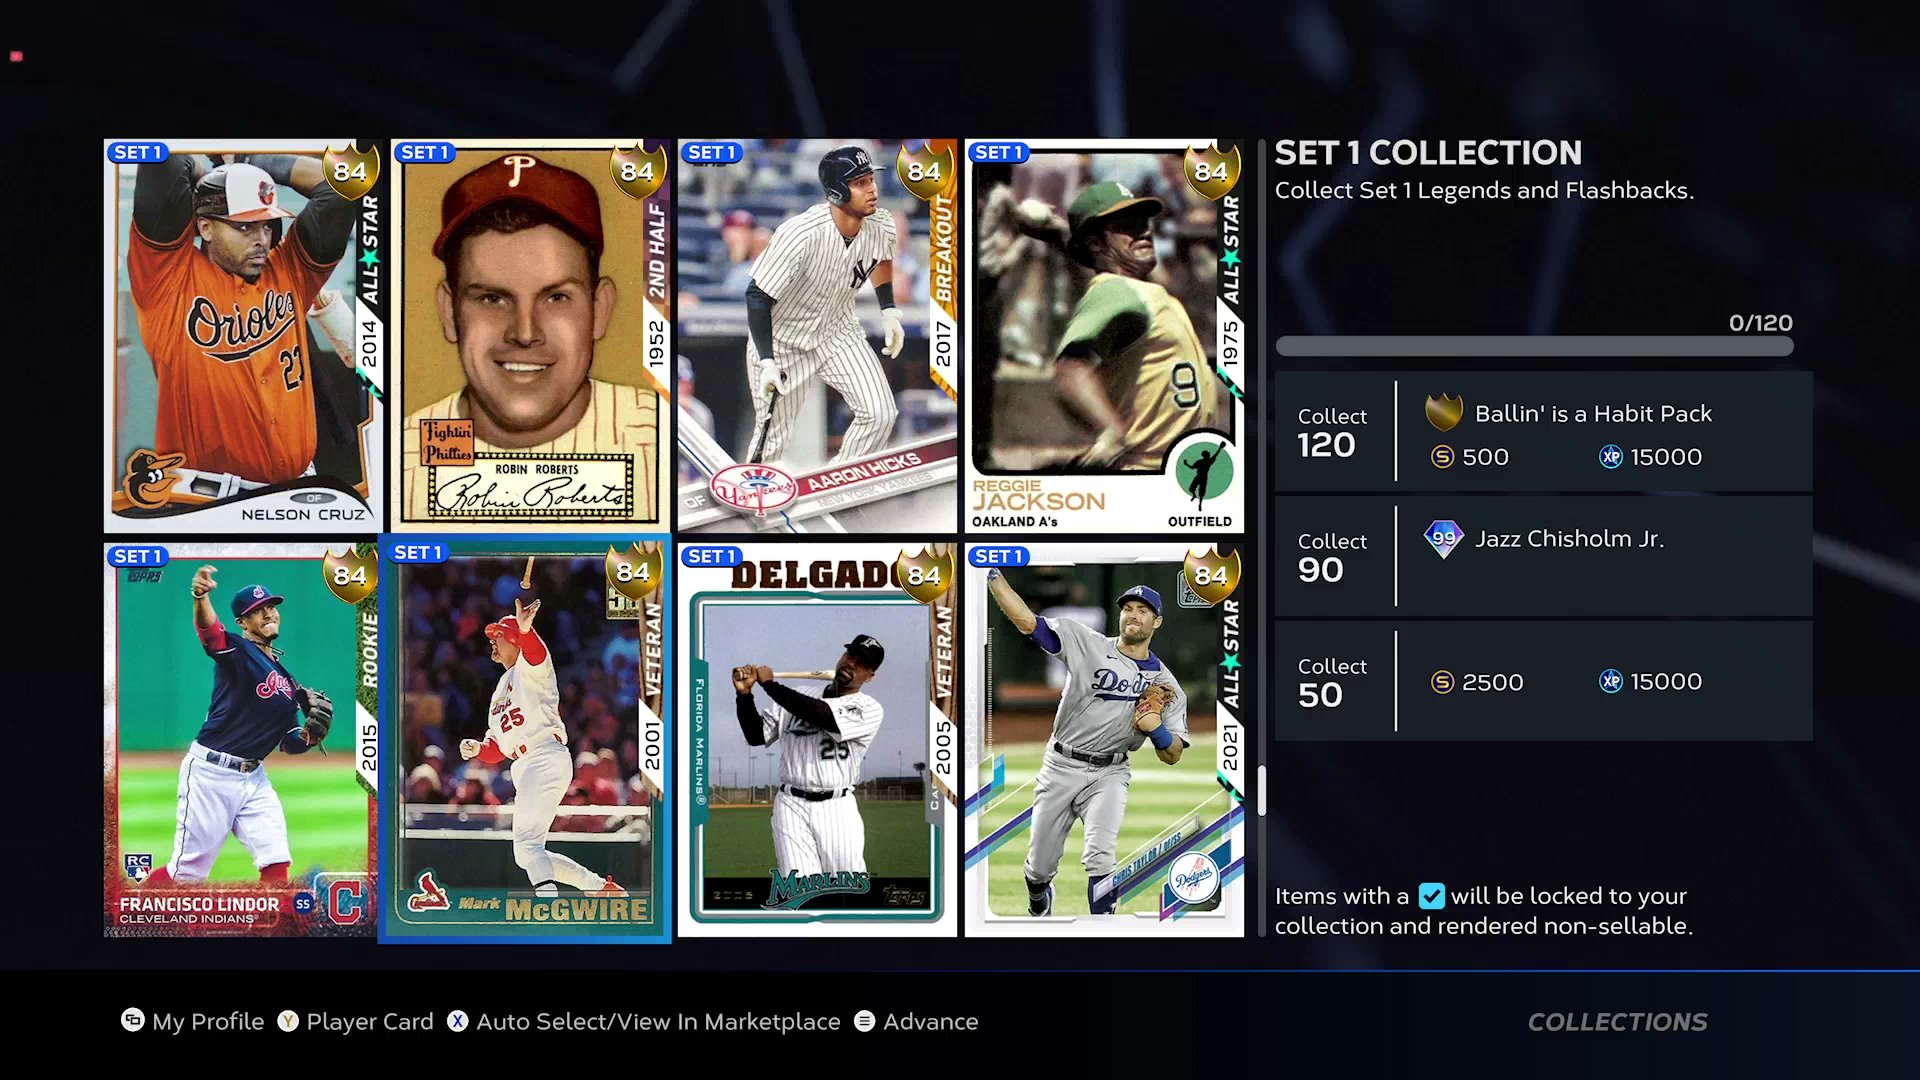 Diamond dynasty ways to play collections